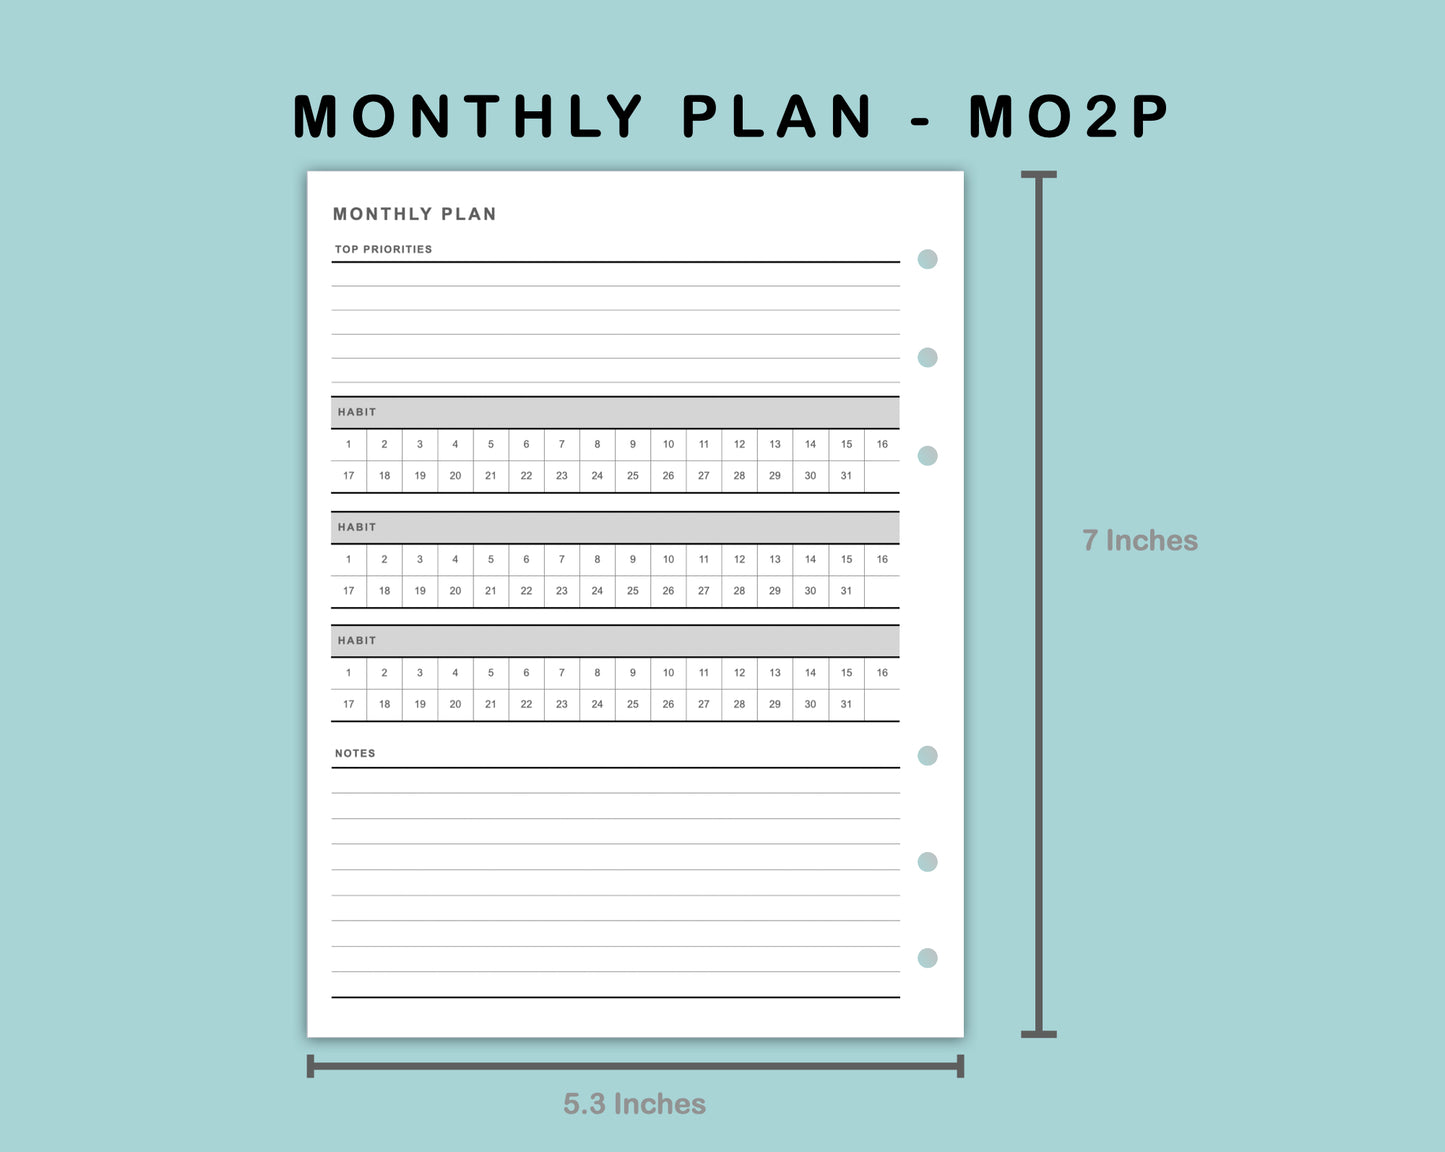 B6 Wide Inserts - Monthly Plan - MO2P - with Habit Tracker